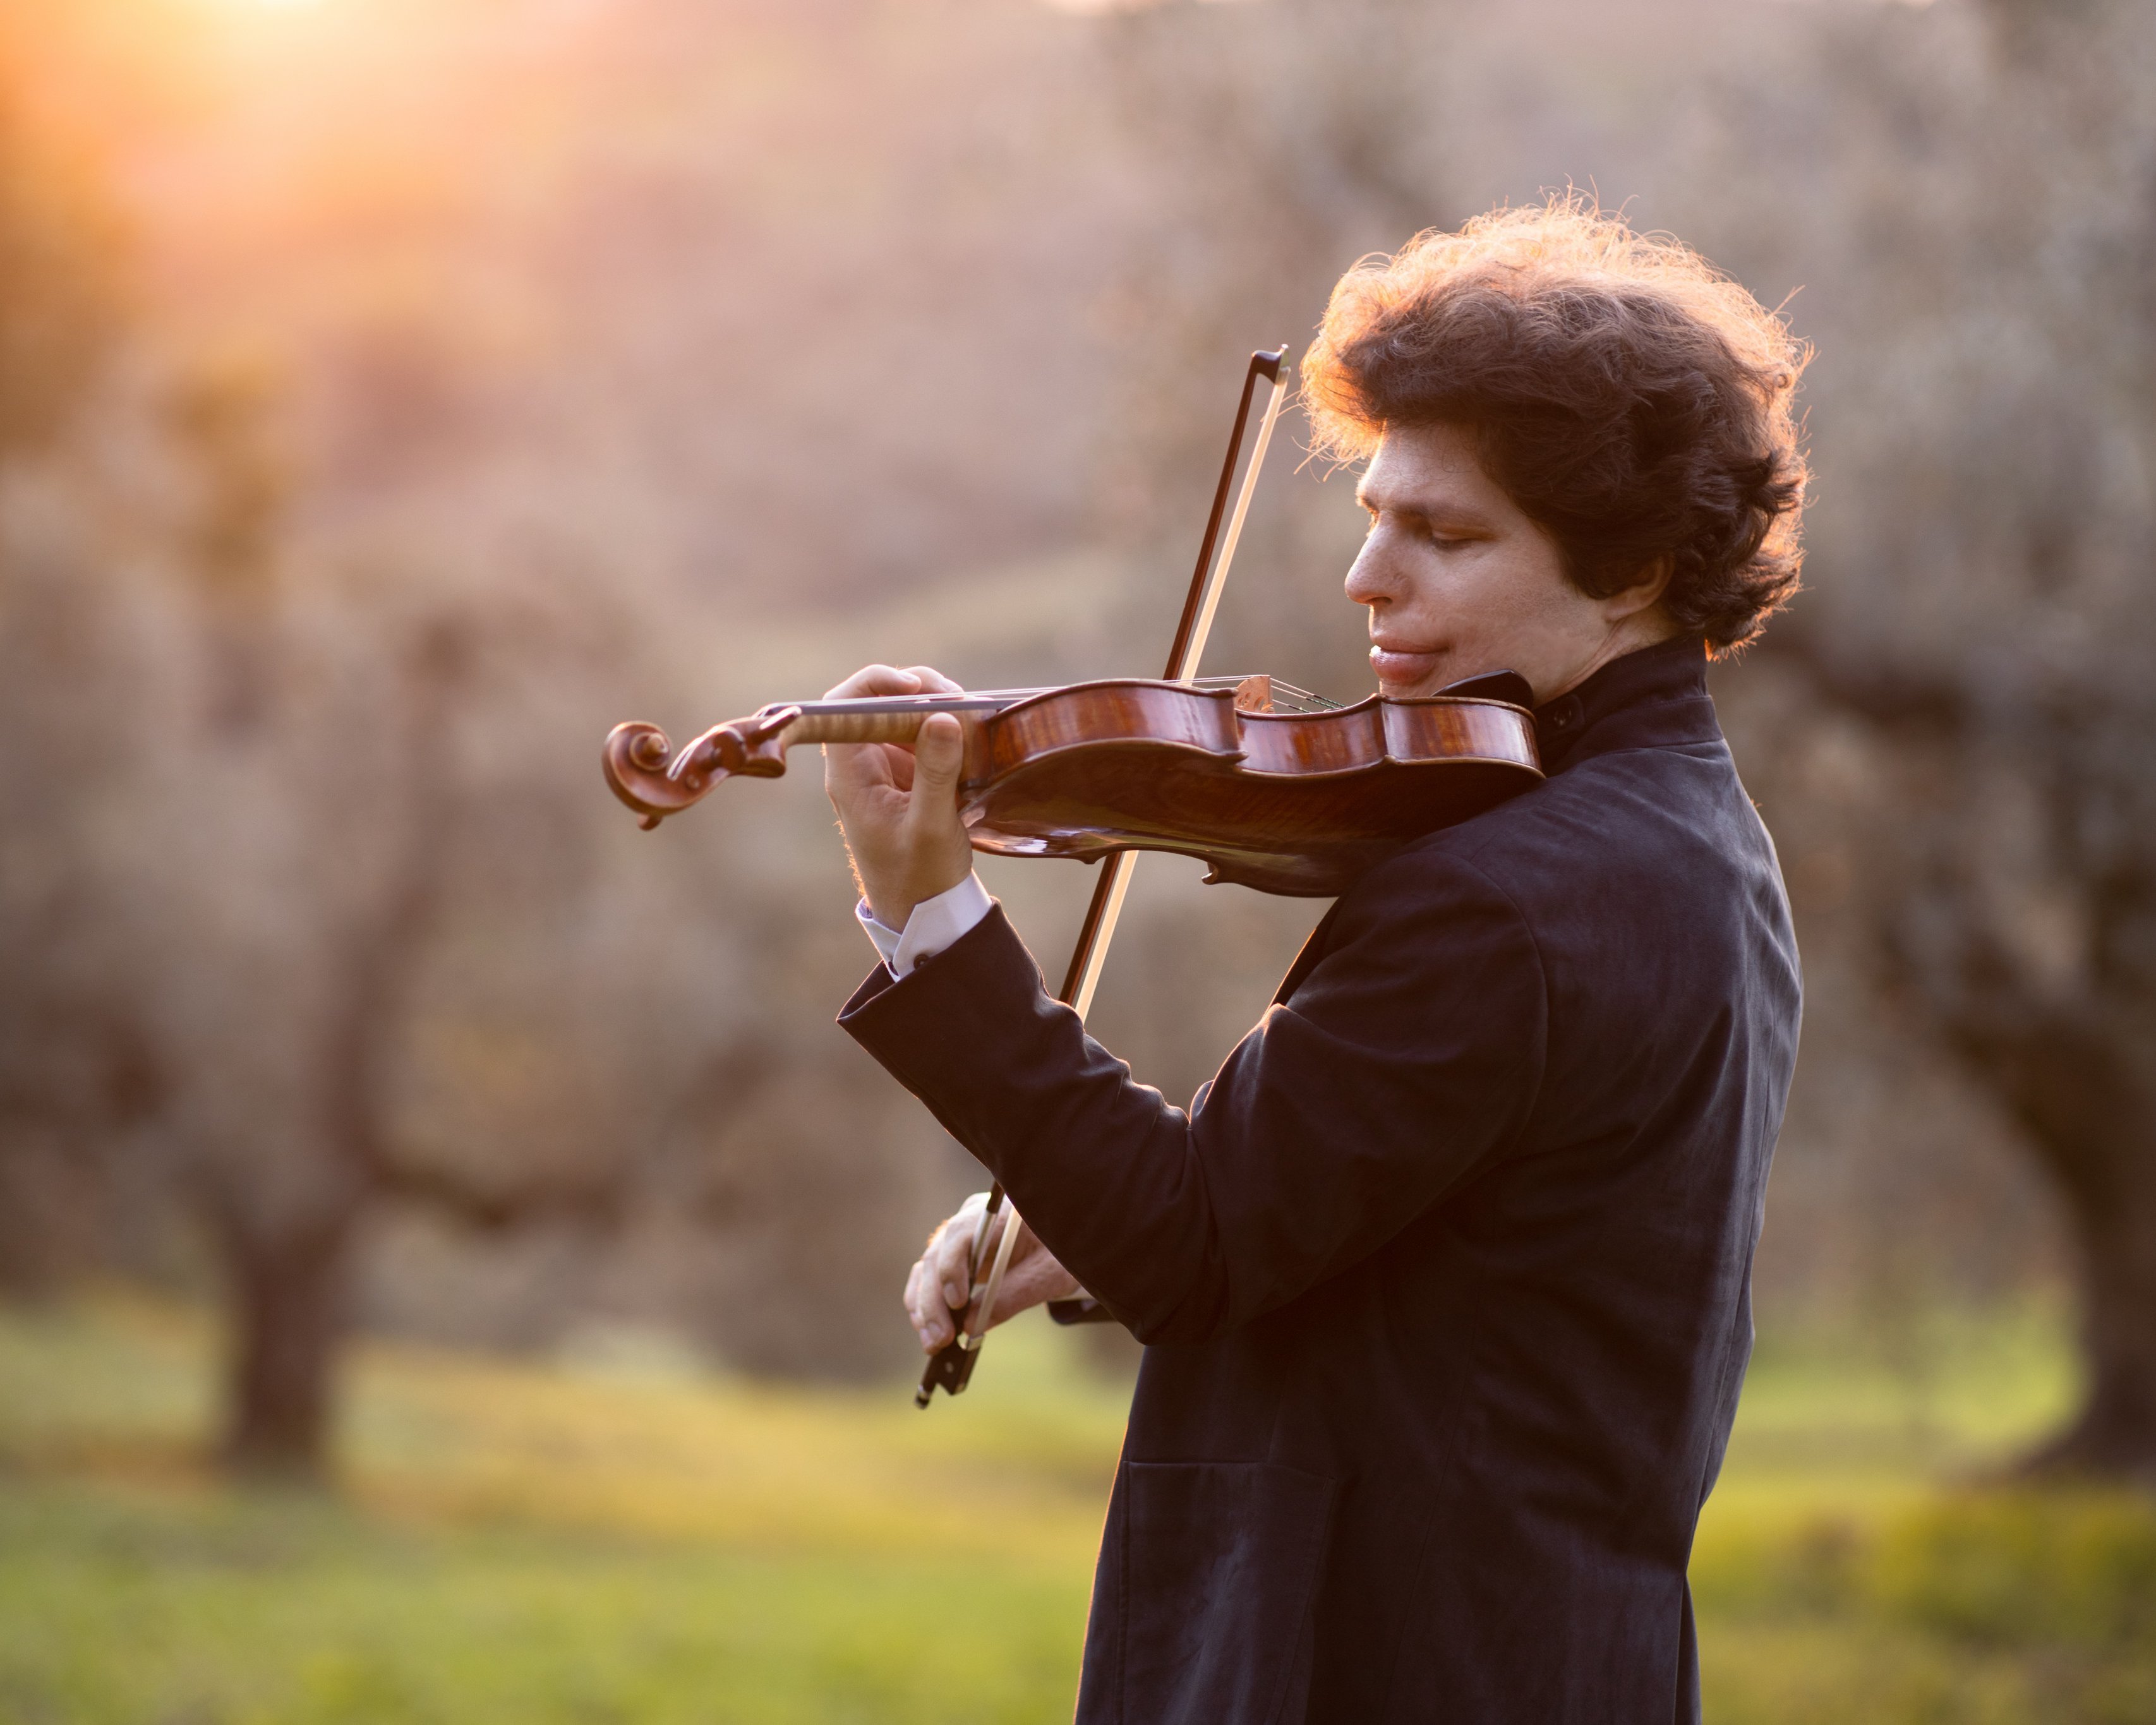 Augustin Hadelich plays the violin outdoors, trees in the background